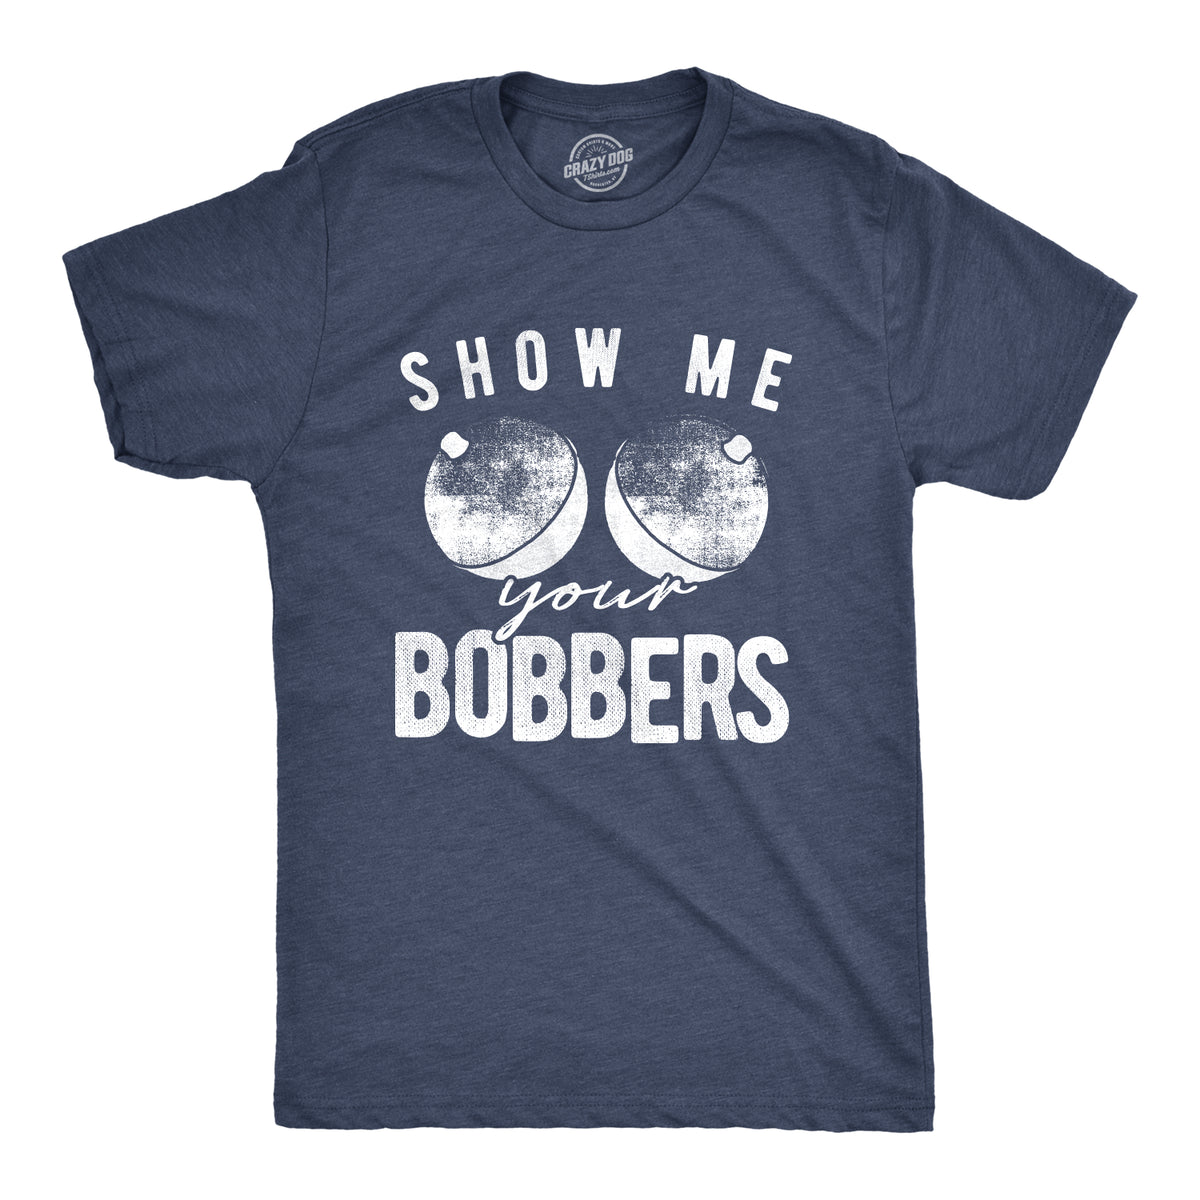 Men's Funny Show Me Your Bobbers T-Shirt Cool Fishing Tee - 3XL